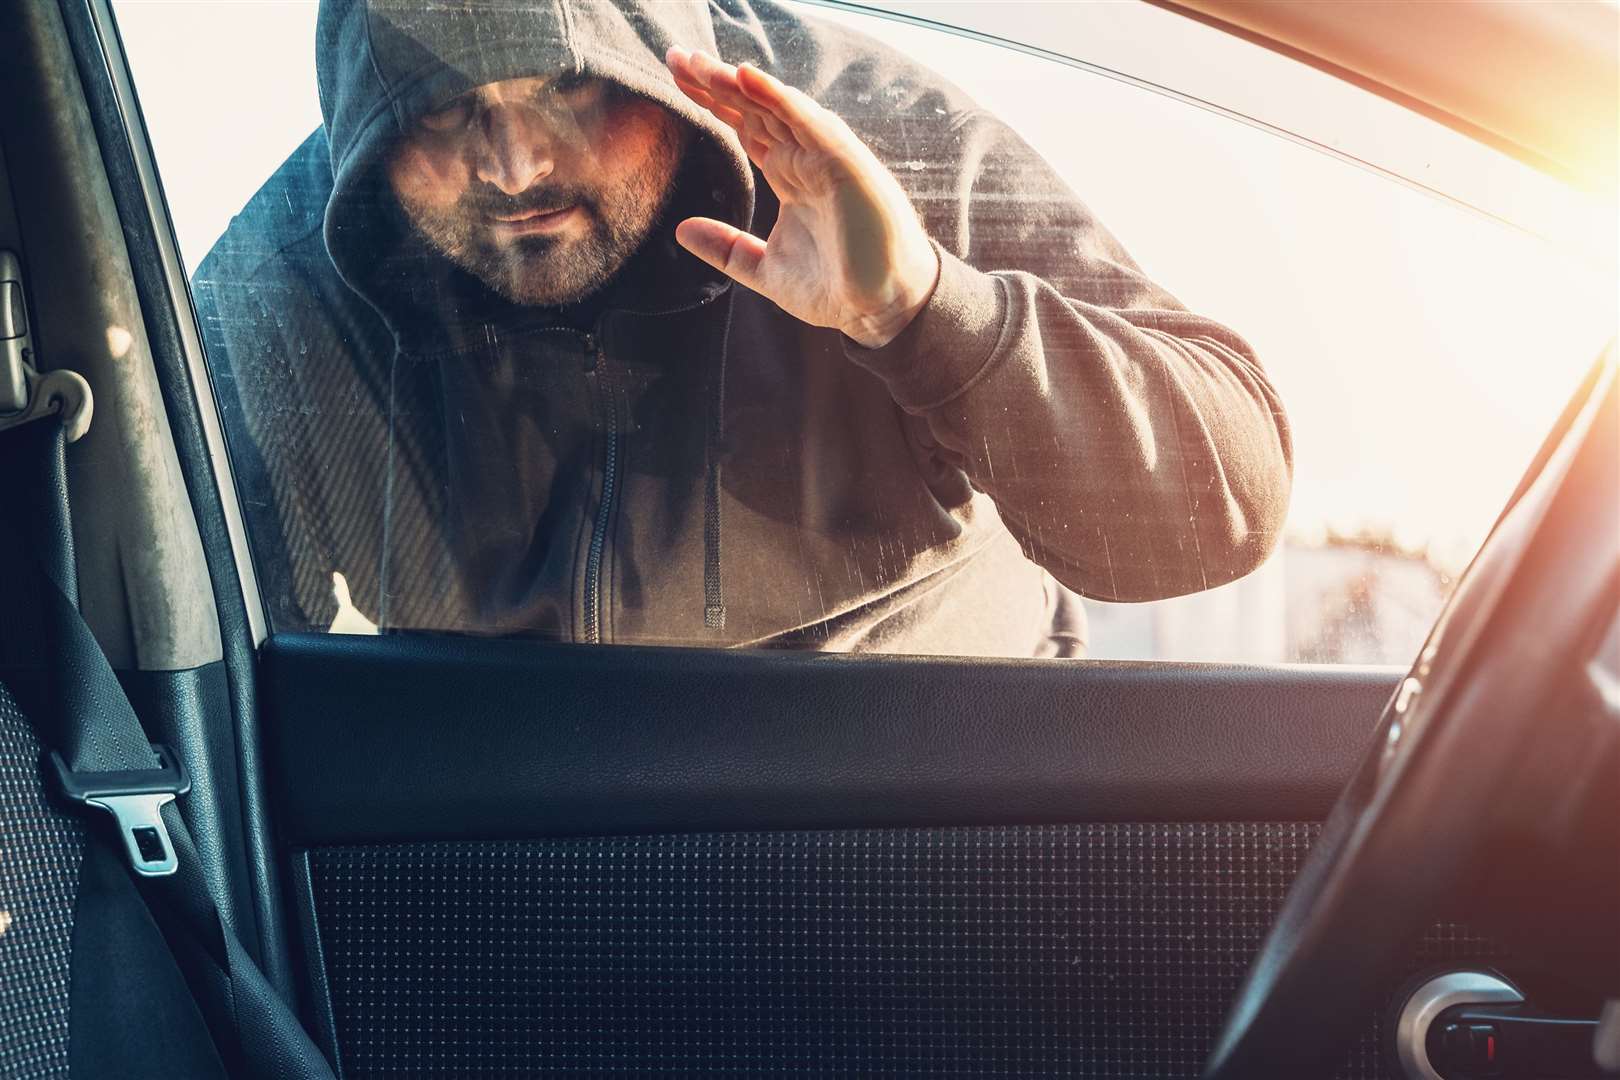 Thefts of and from cars and other vehicles is on the rise.